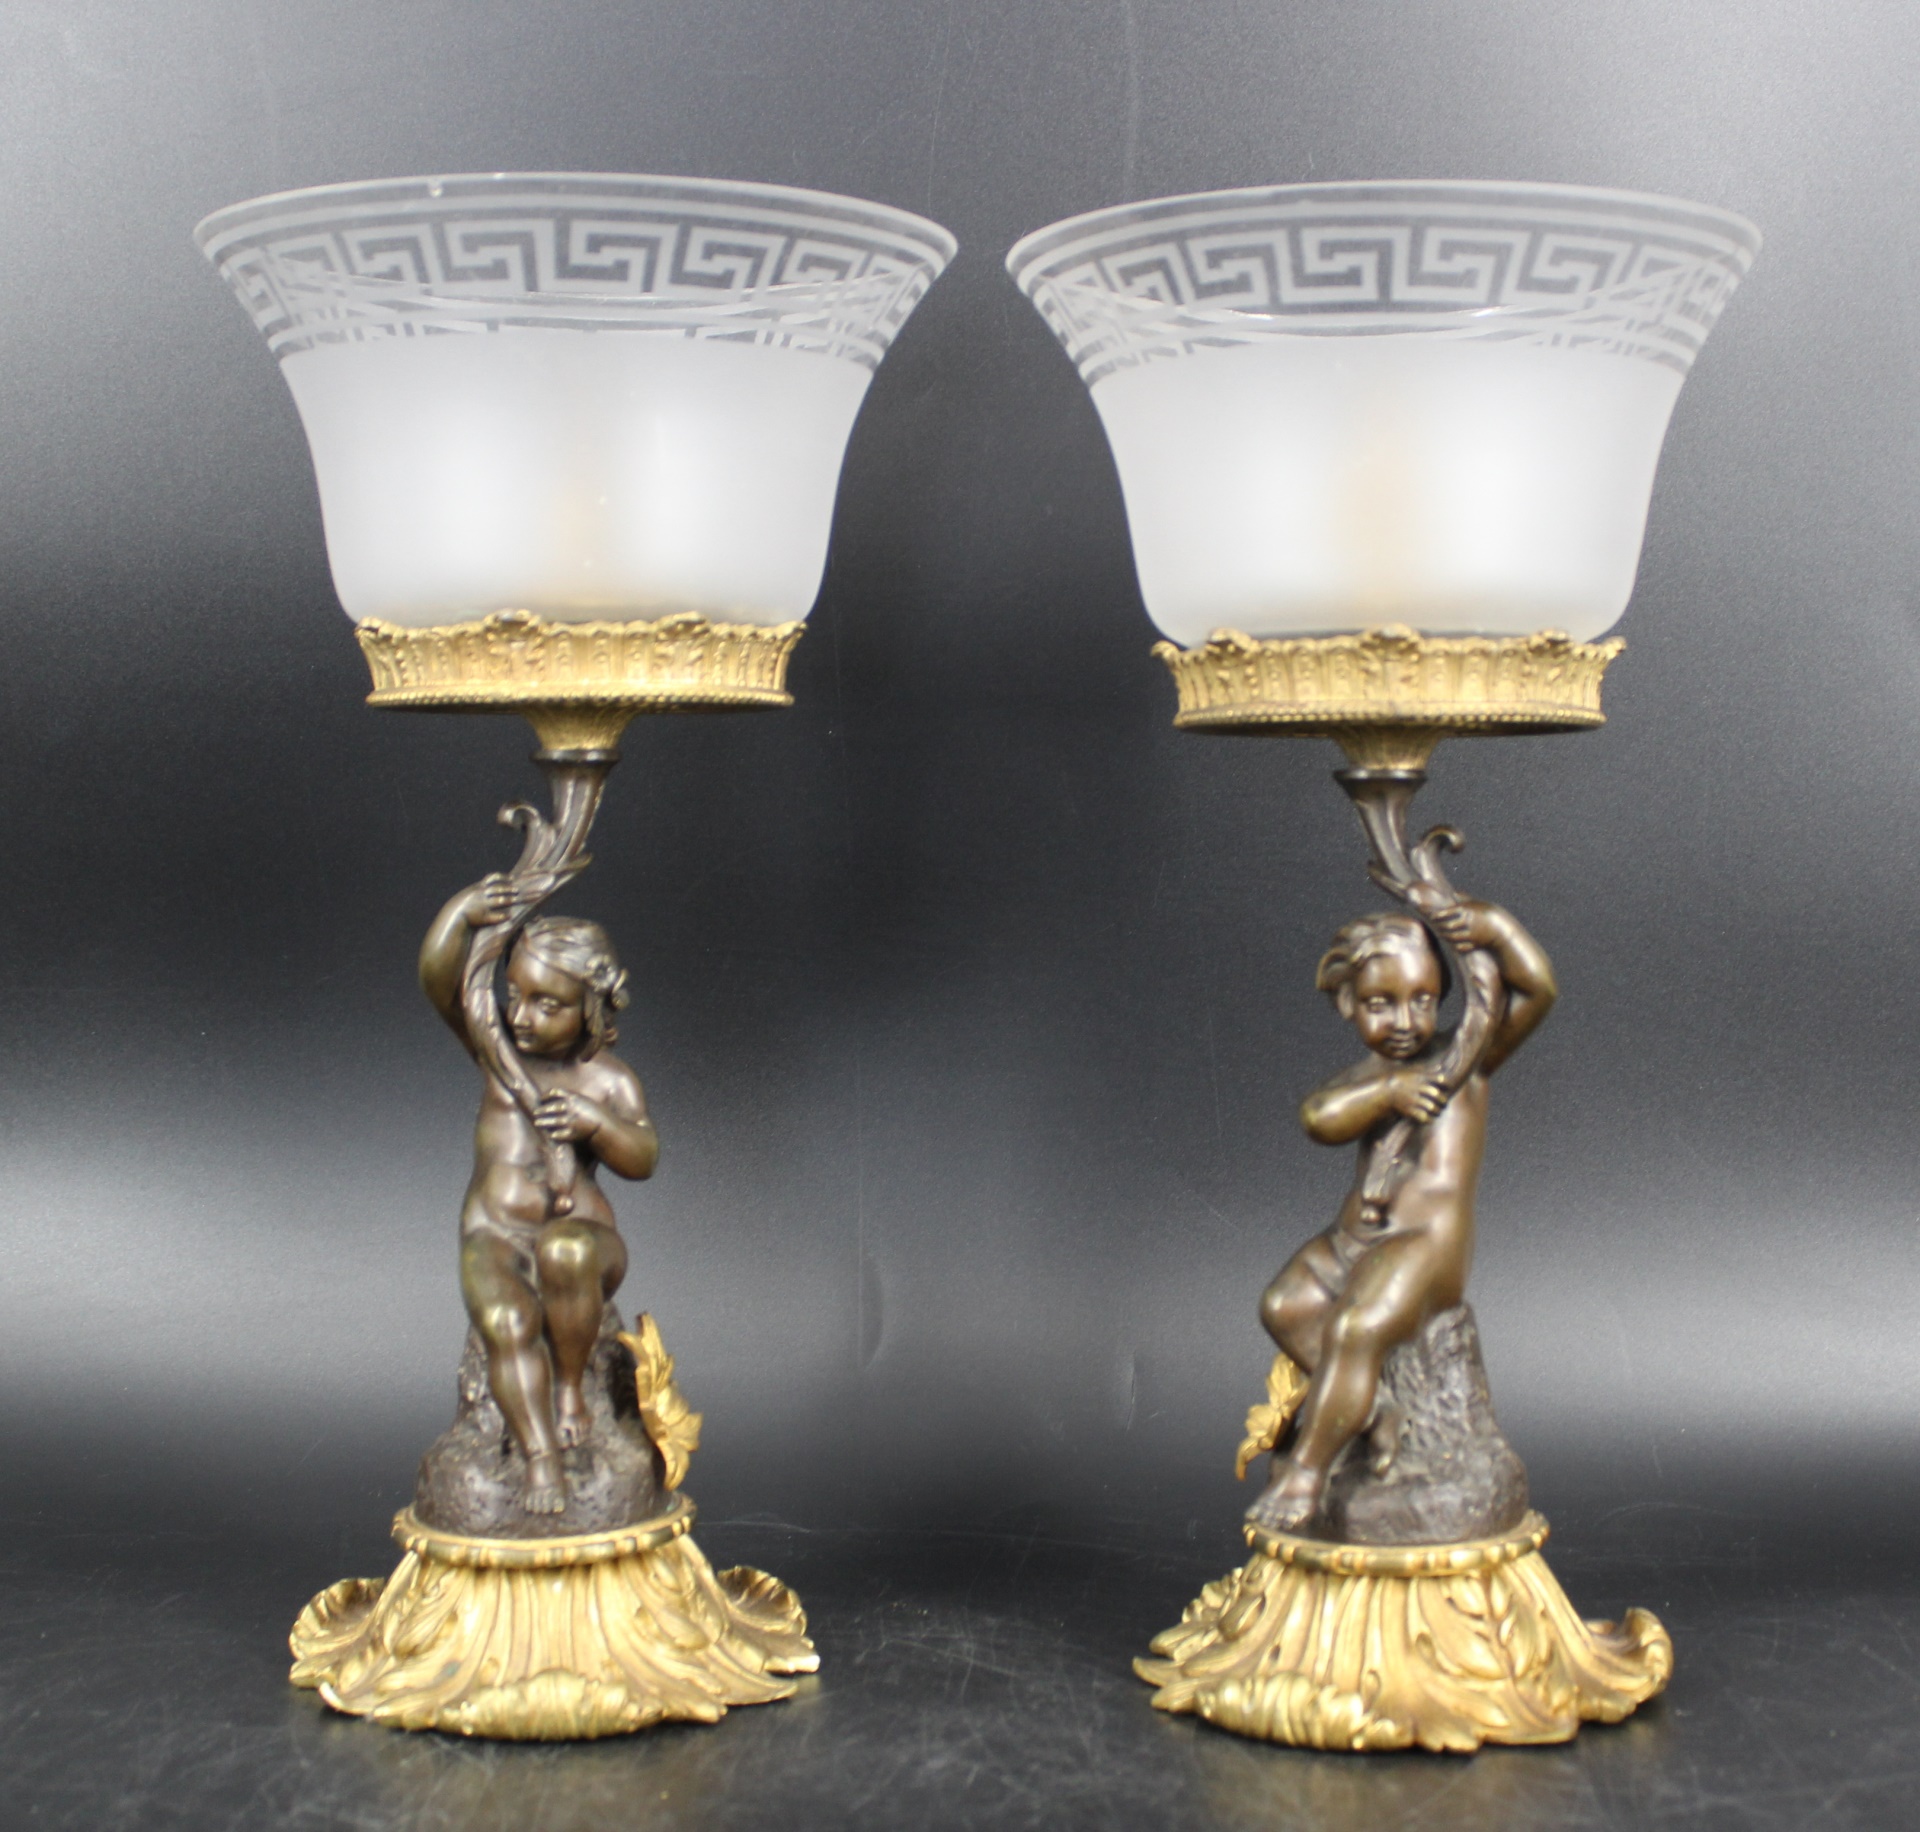 PAIR OF BRONZE CANDLESTICKS WITH